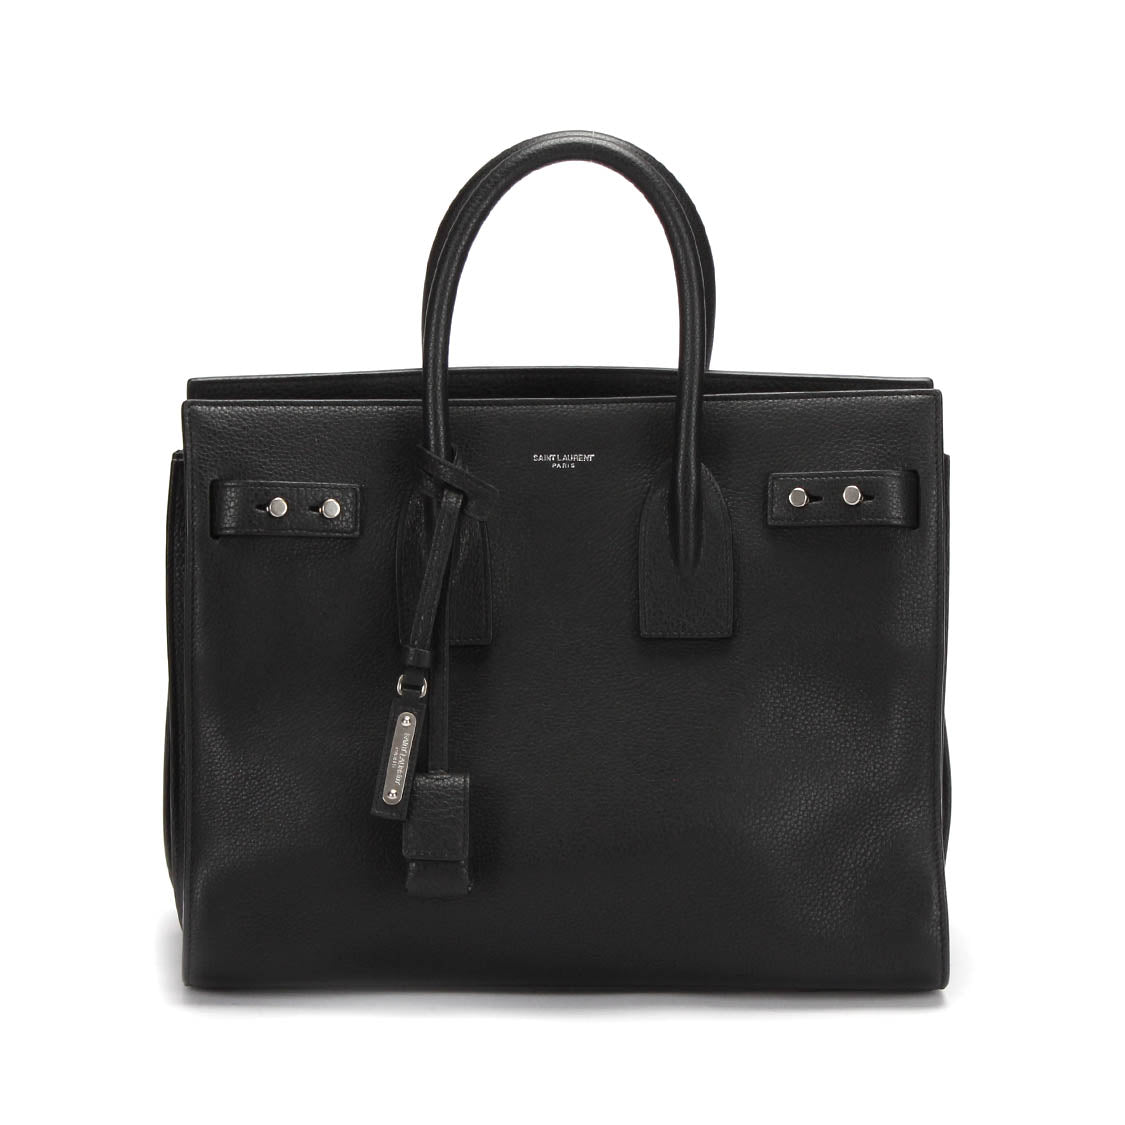 Small Sac de Jour Leather Tote Bag